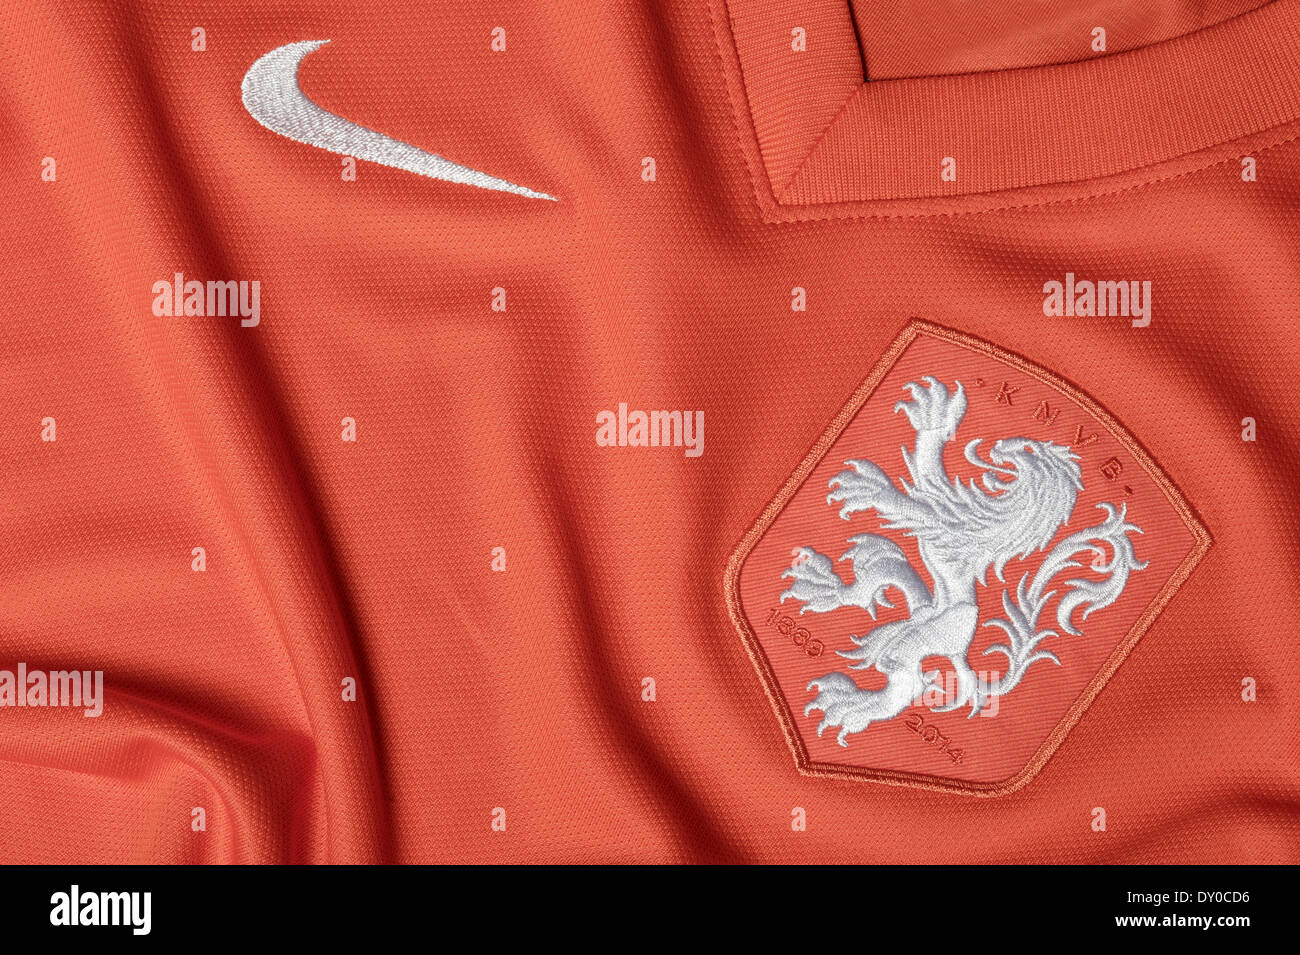 Knvb logo hi-res stock photography and images - Alamy